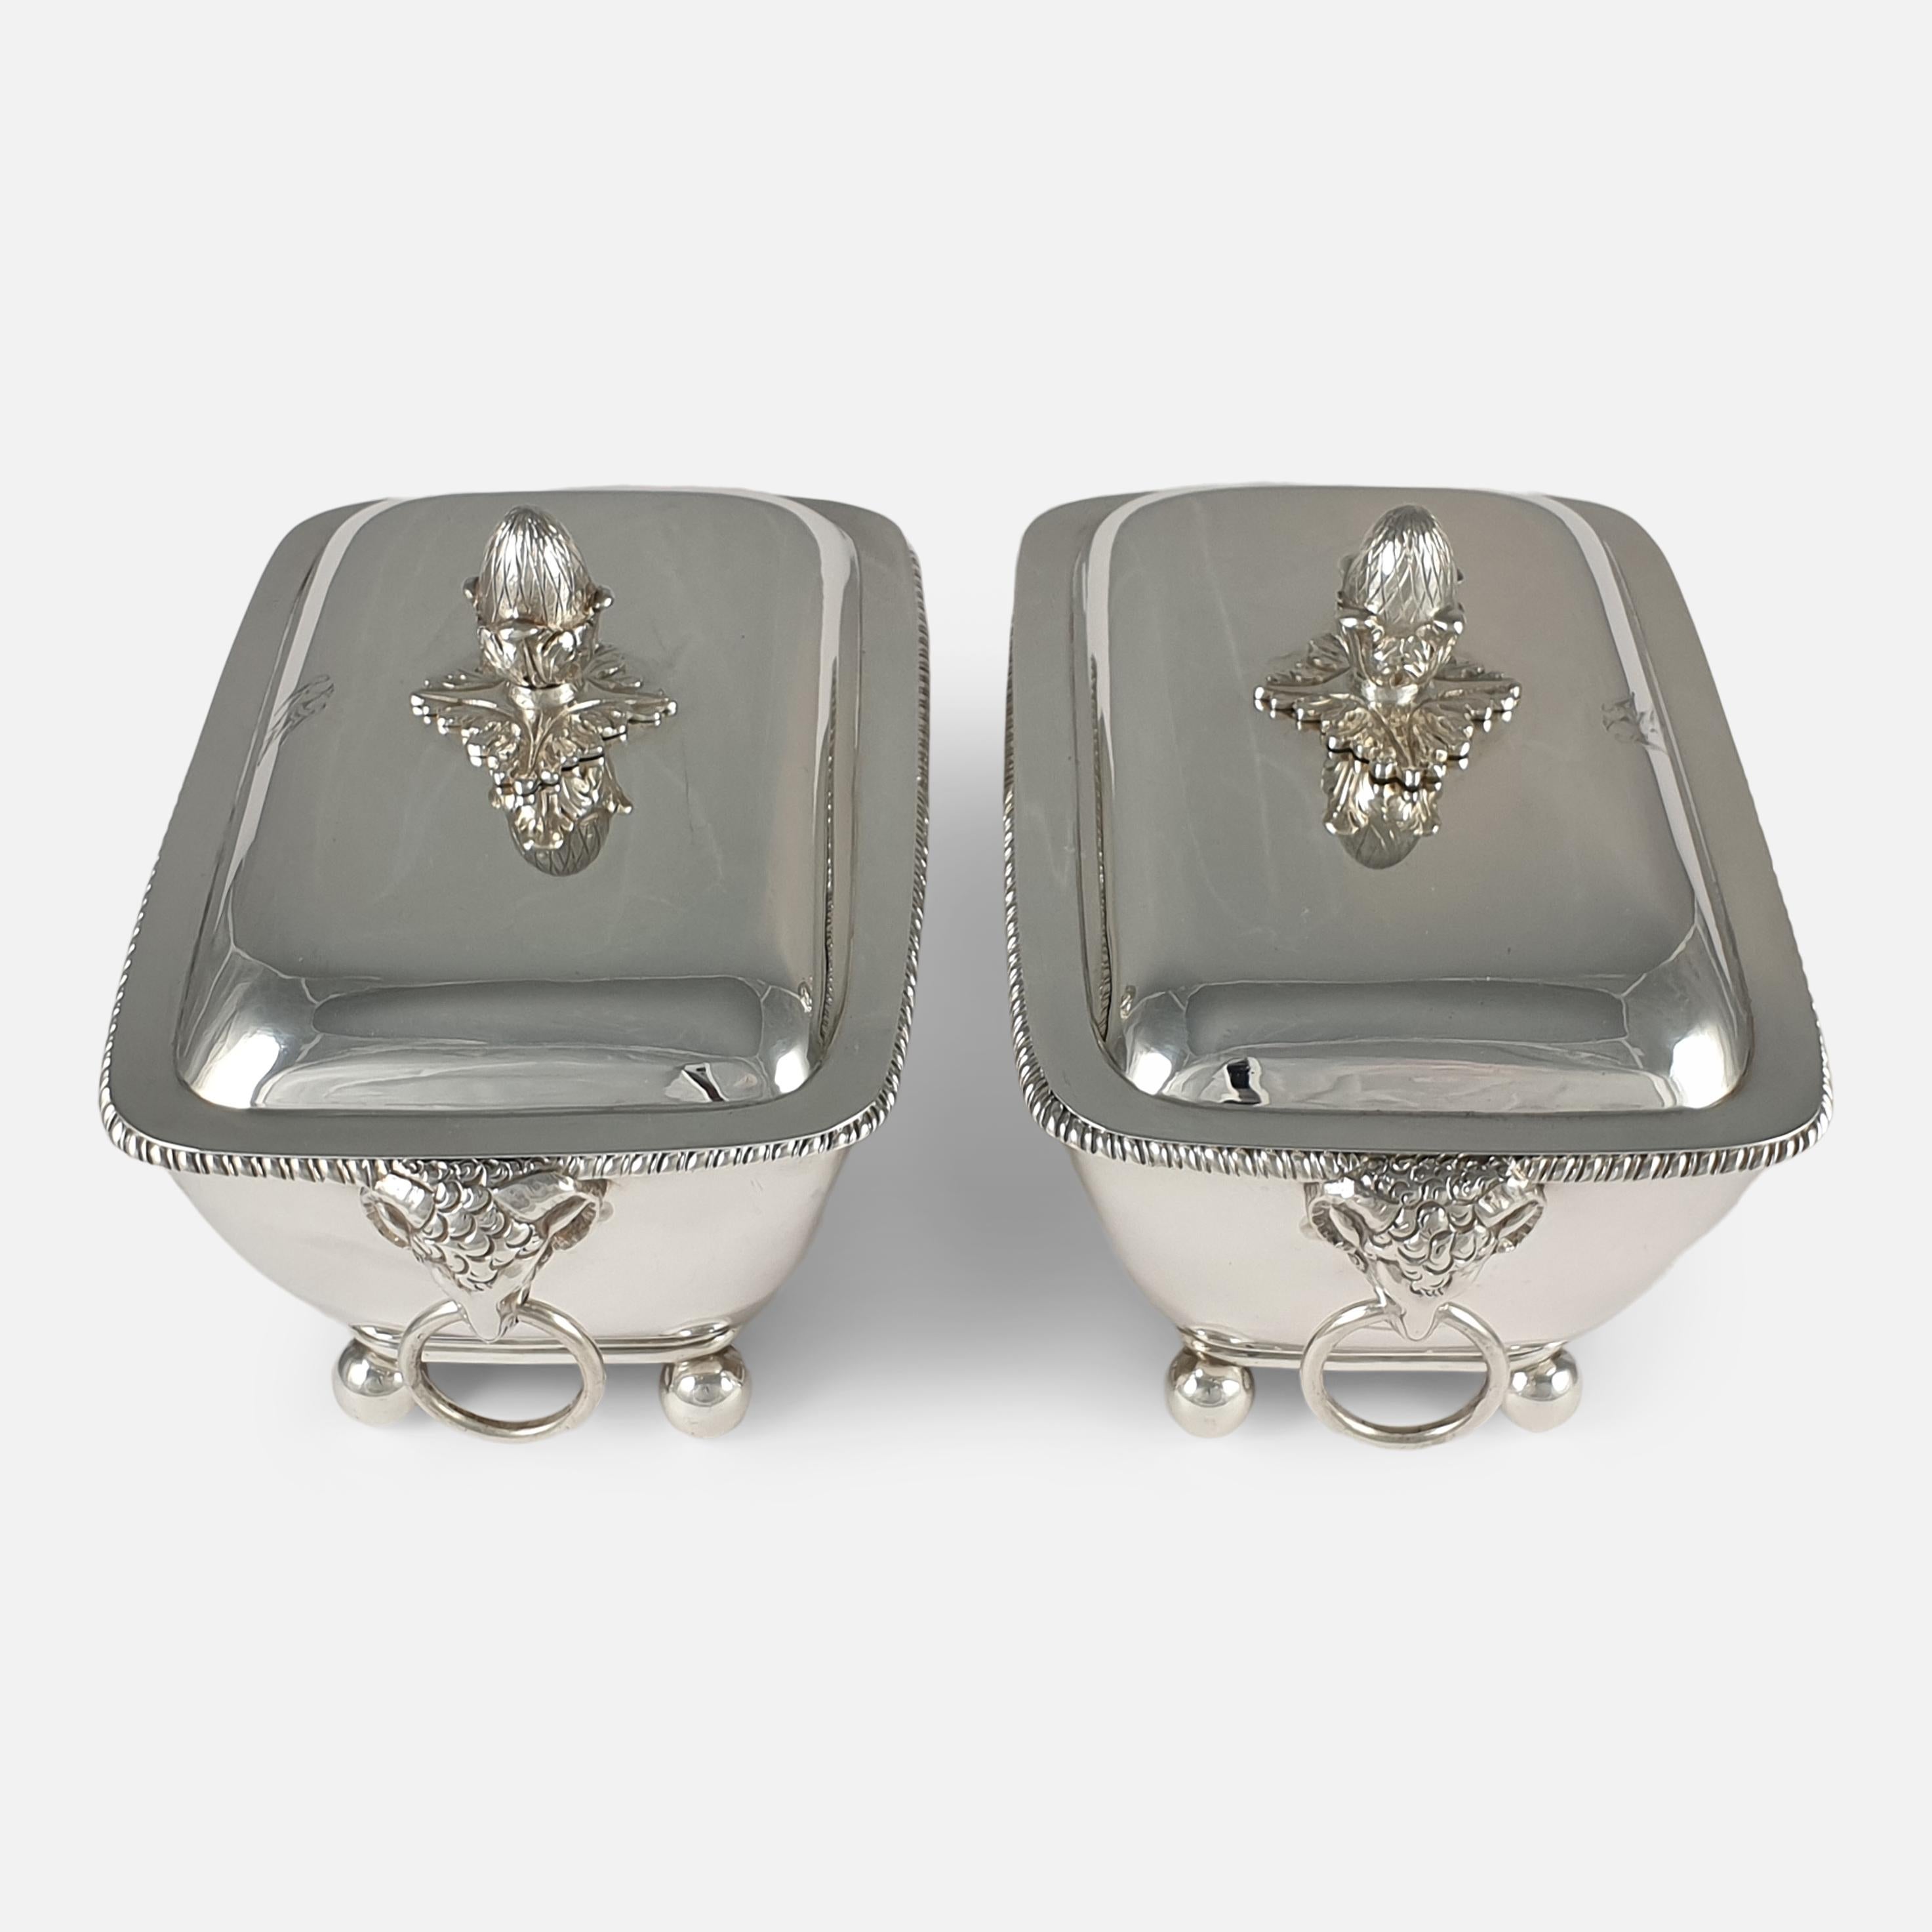 Sterling Silver Pair of George III Silver Sauce Tureens and Covers, John Robins, London, 1802 For Sale